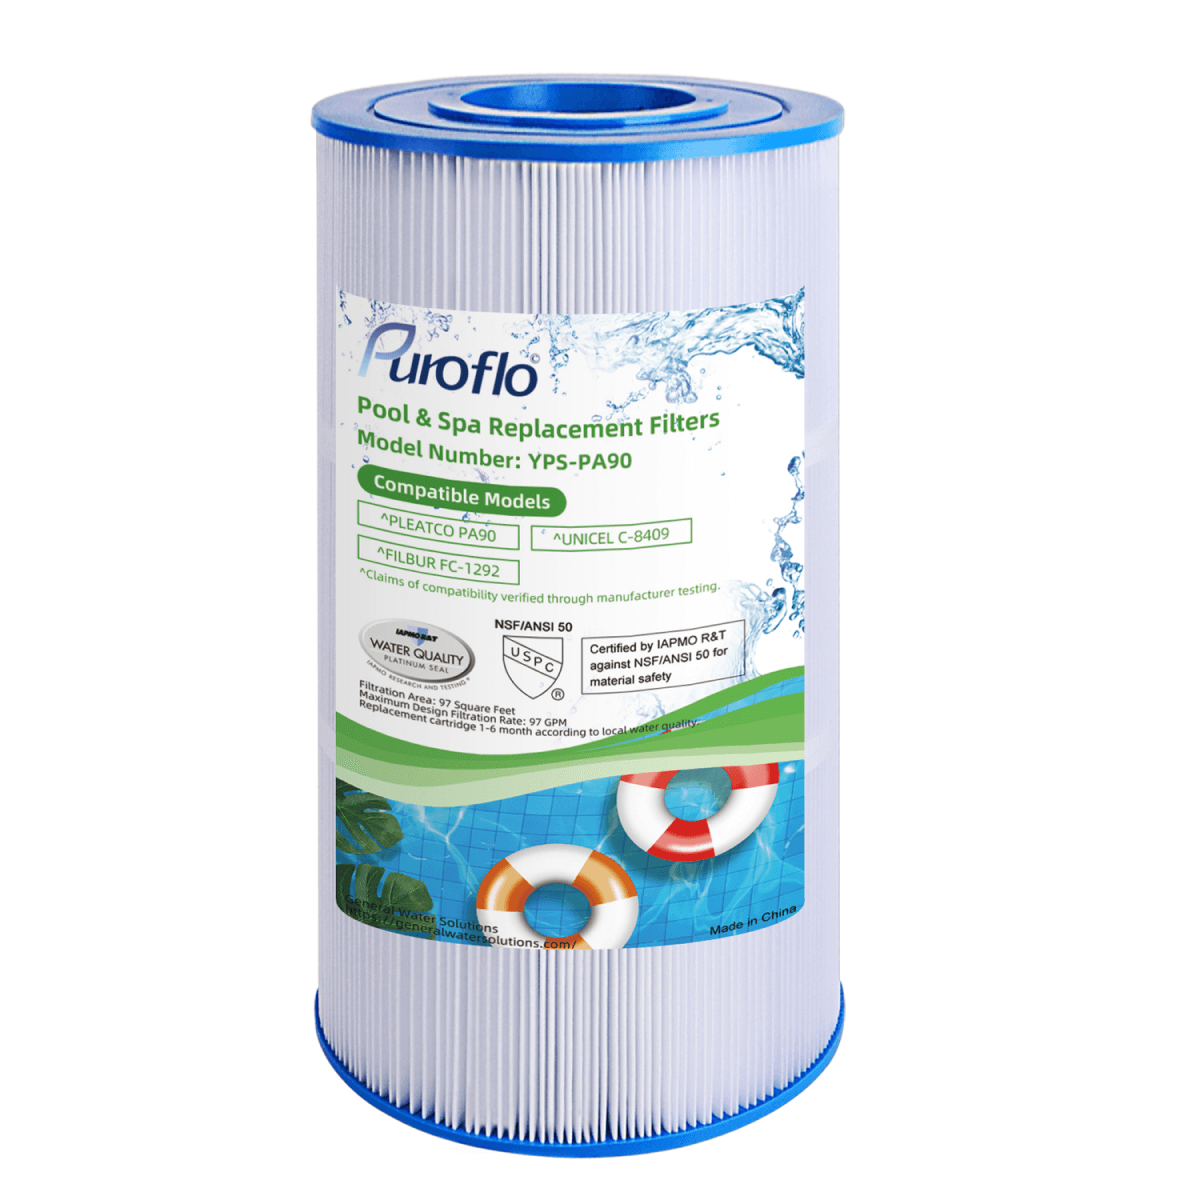 Puroflo Pool Filter Replacement for Pleatco PA90, Unicel C-8409, Filbur FC-1292 (1 Pack)